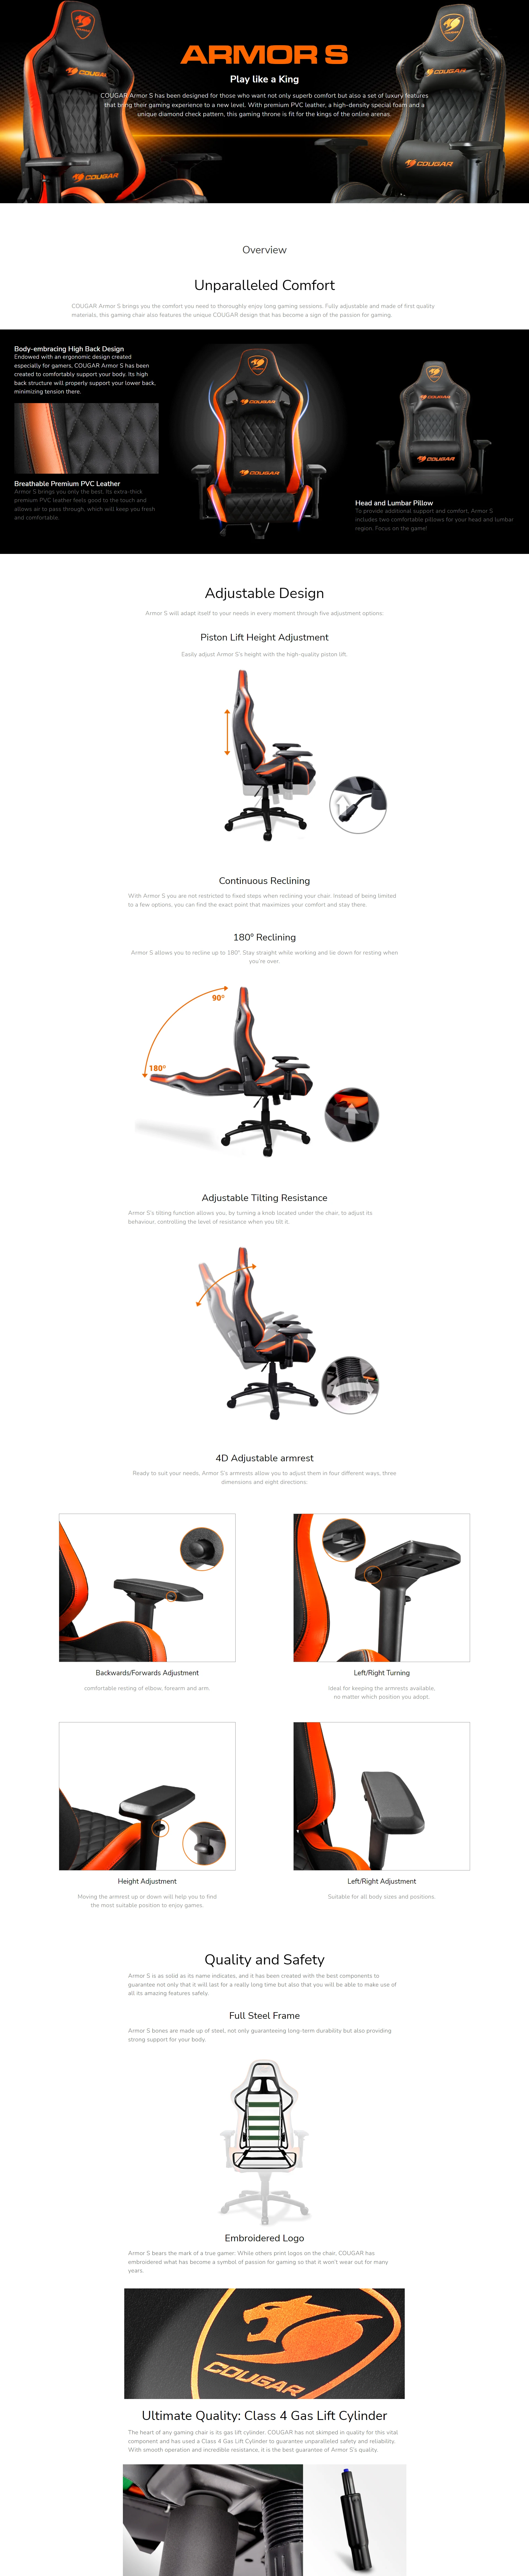 Overview - Cougar - Armor S Gaming Chair